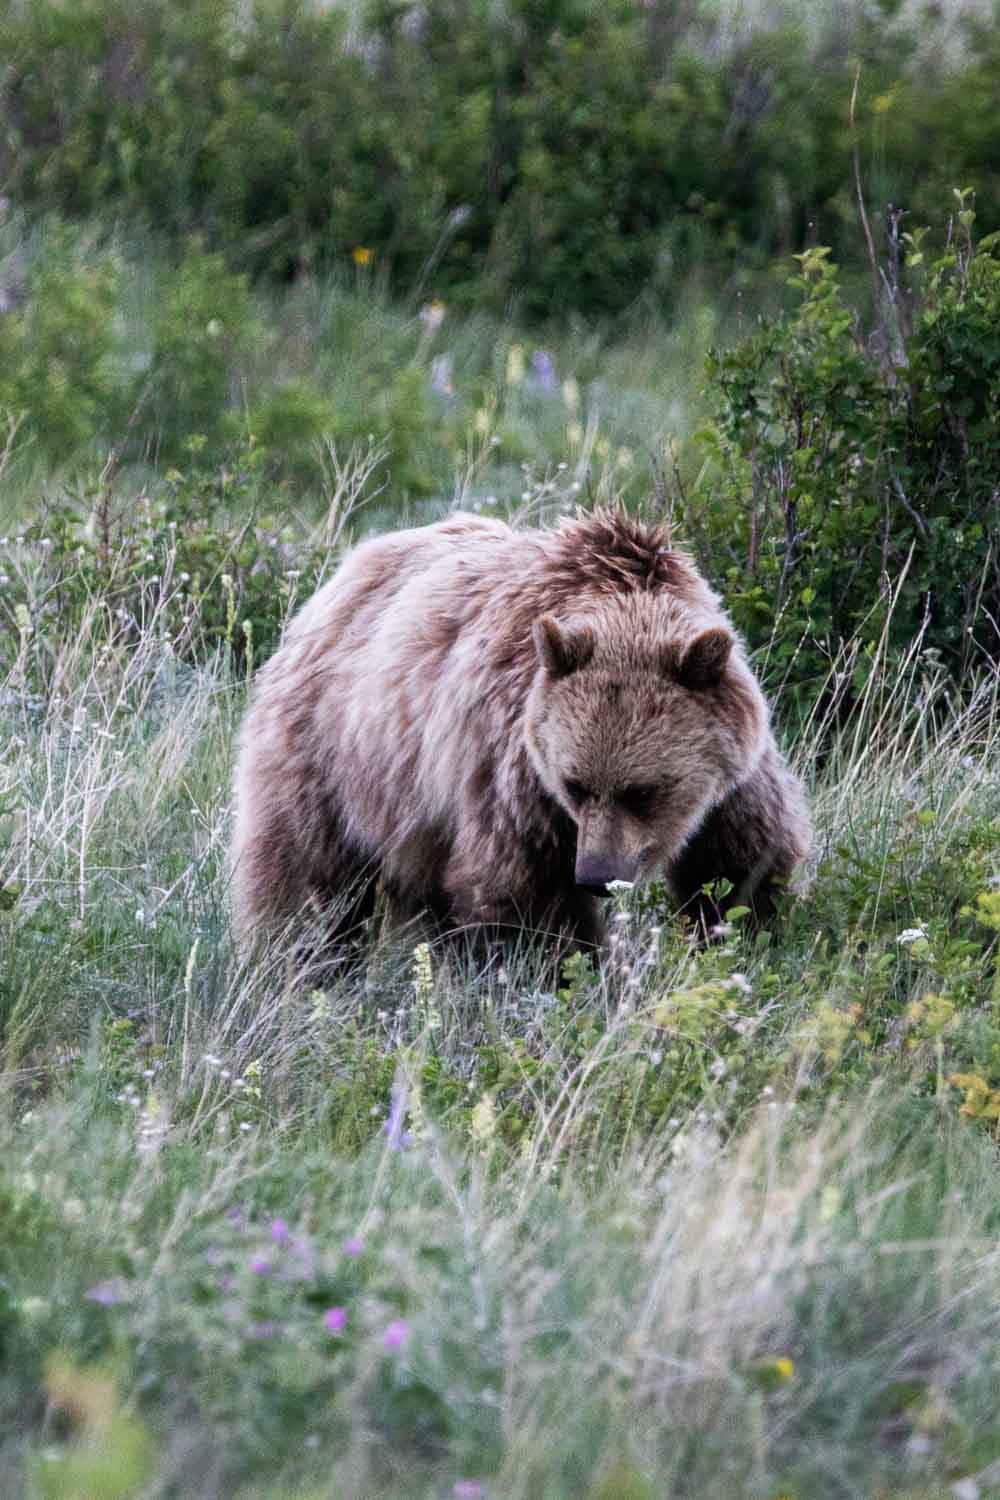 Grizzly bear in the Swiftcurrent Valley in Many Glacier, wildlife viewing in Glacier National Park, Montana